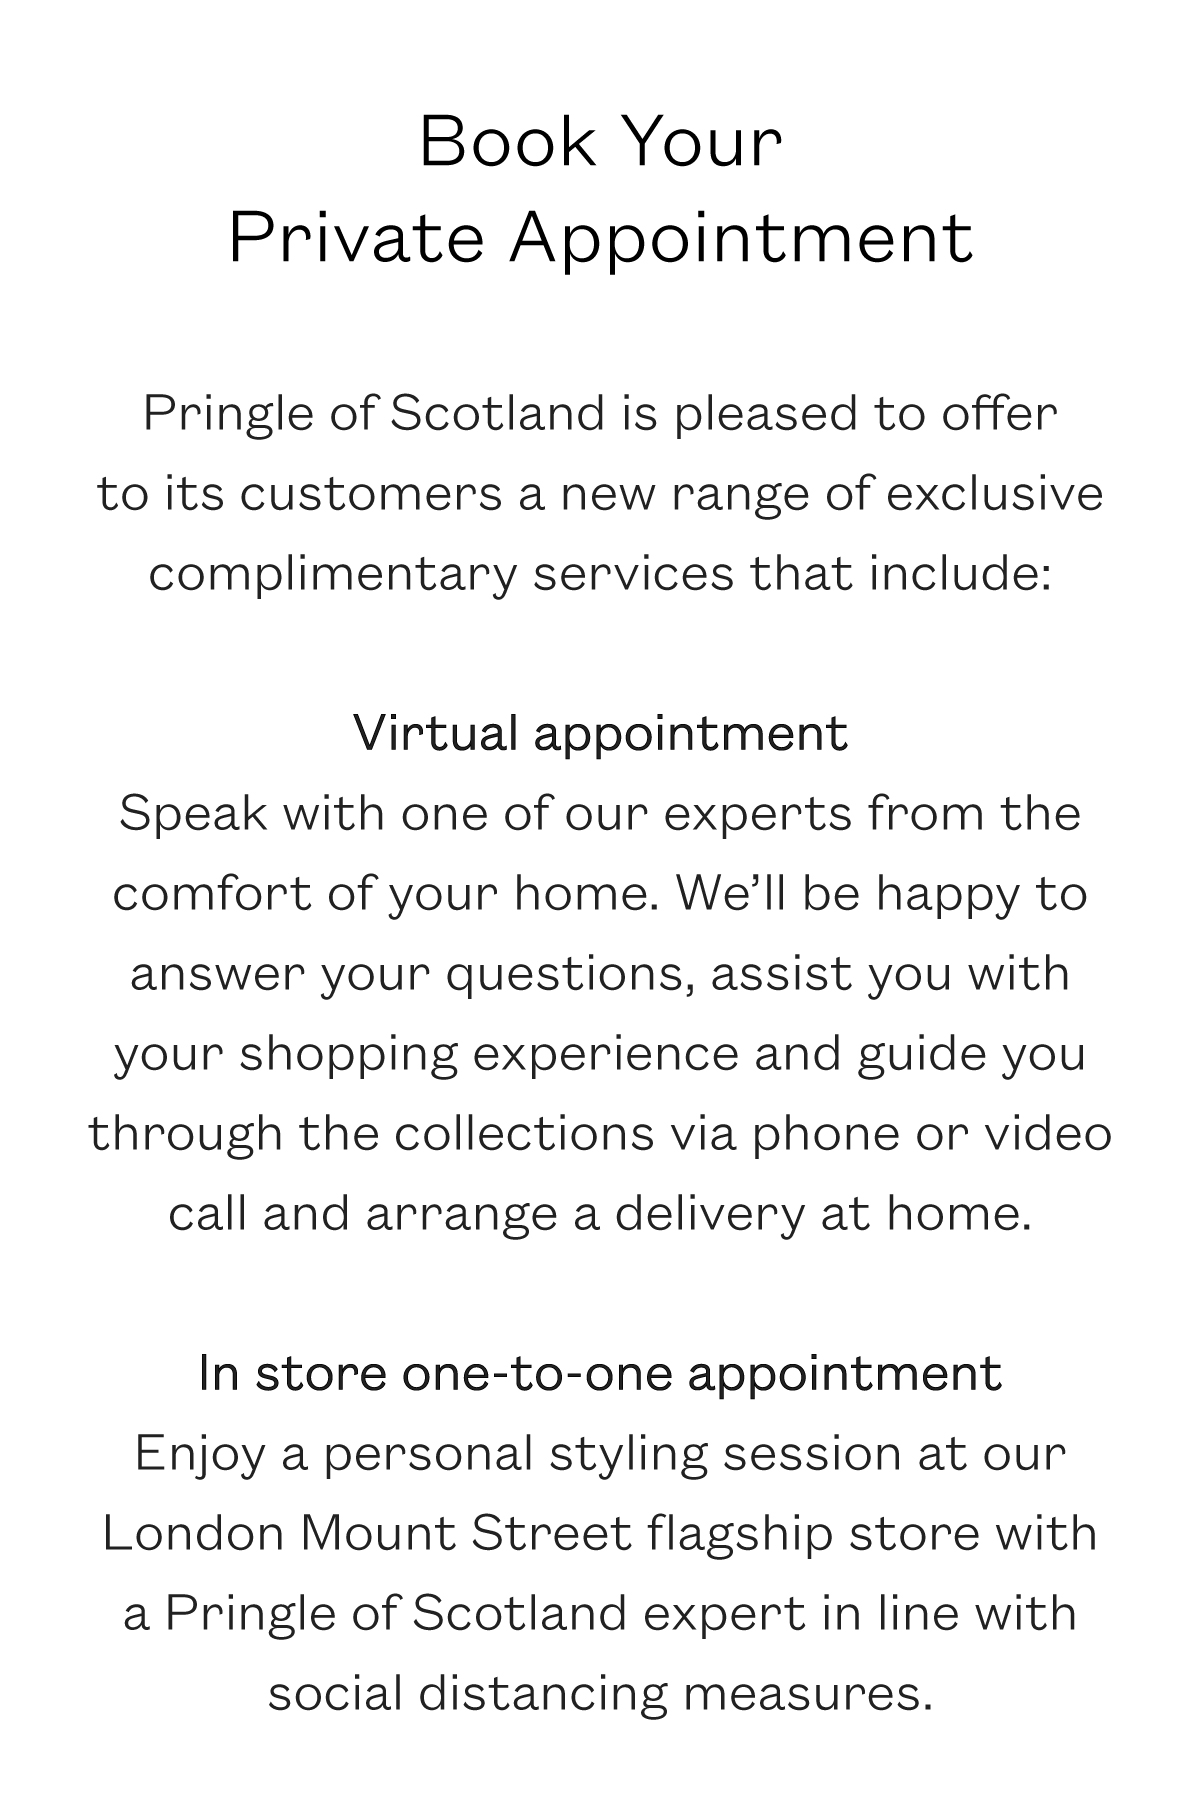 Pringle of Scotland is pleased to offer to its customers a range of exclusive complimentary services that include: Virtual appointment: Speak with one of our experts from the comfort of your home. We'll be happy to answer your questions, assist you with your shopping experience and guide you through the collections via phone or video call and arrange a delivery at home. In store one-to-one appointment: Enjoy a personal styling session at our London Mount Street flagship store with a Pringle of Scotland expert in line with social distancing measures.